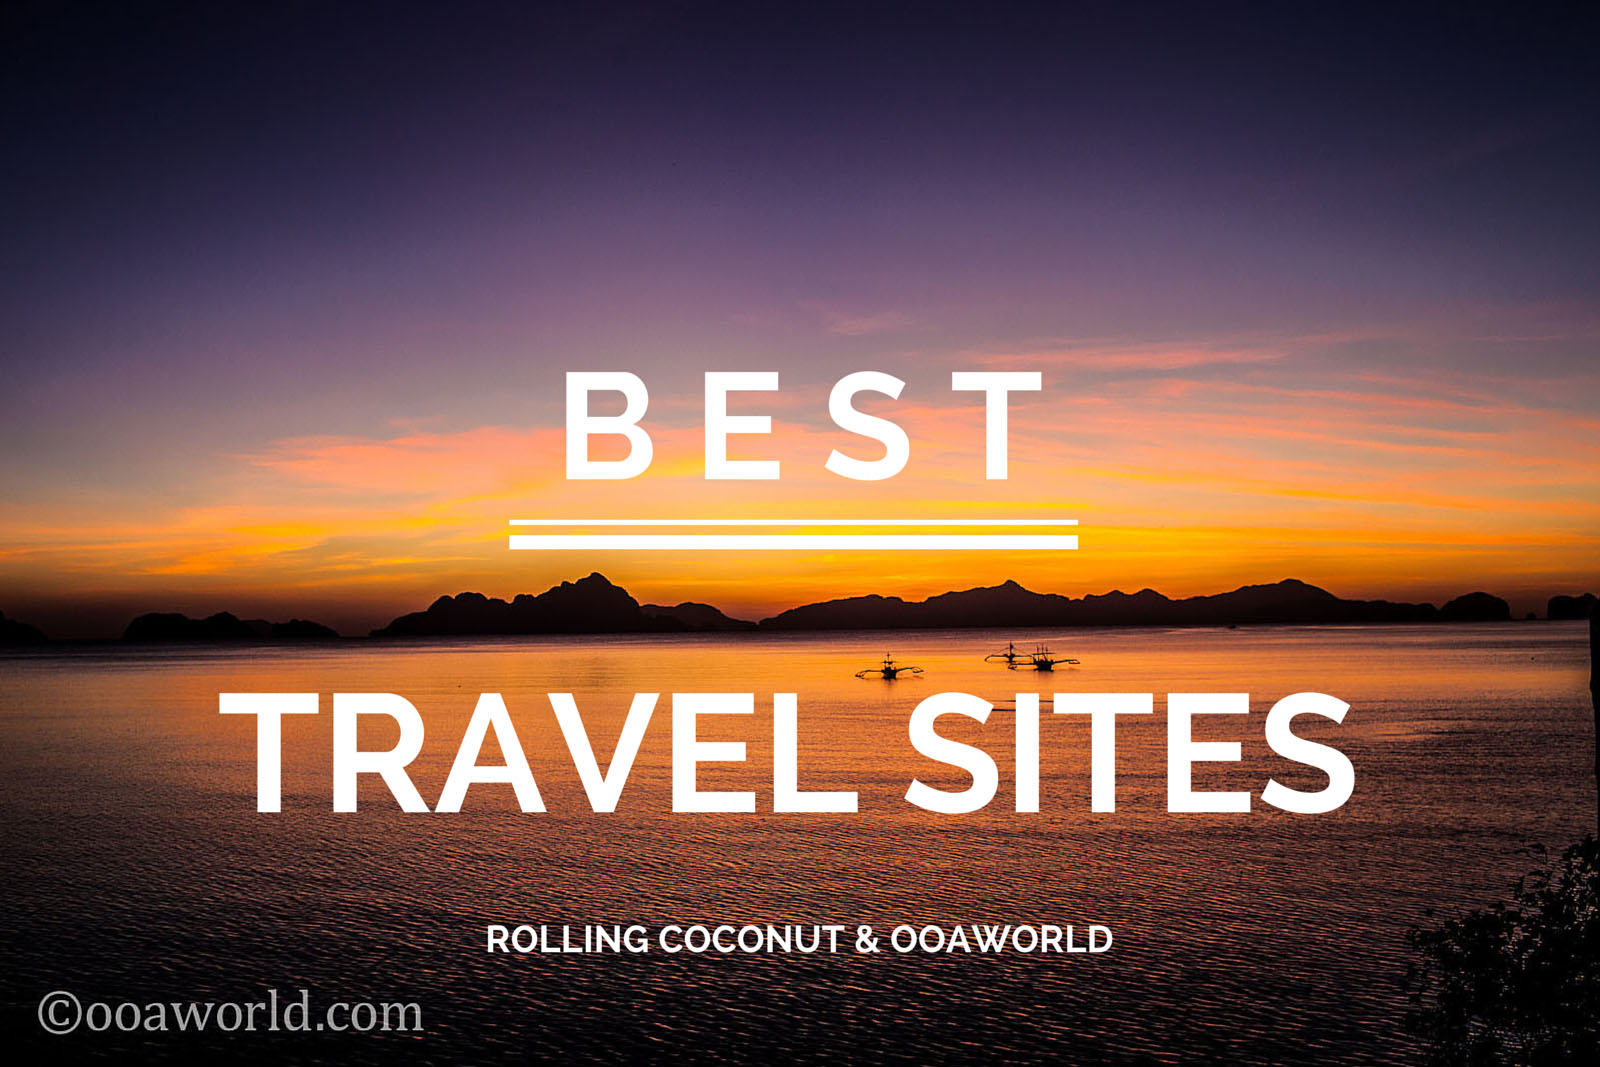 Best Travel Sites Top 10 Travel Blogs per Category - OOAworld